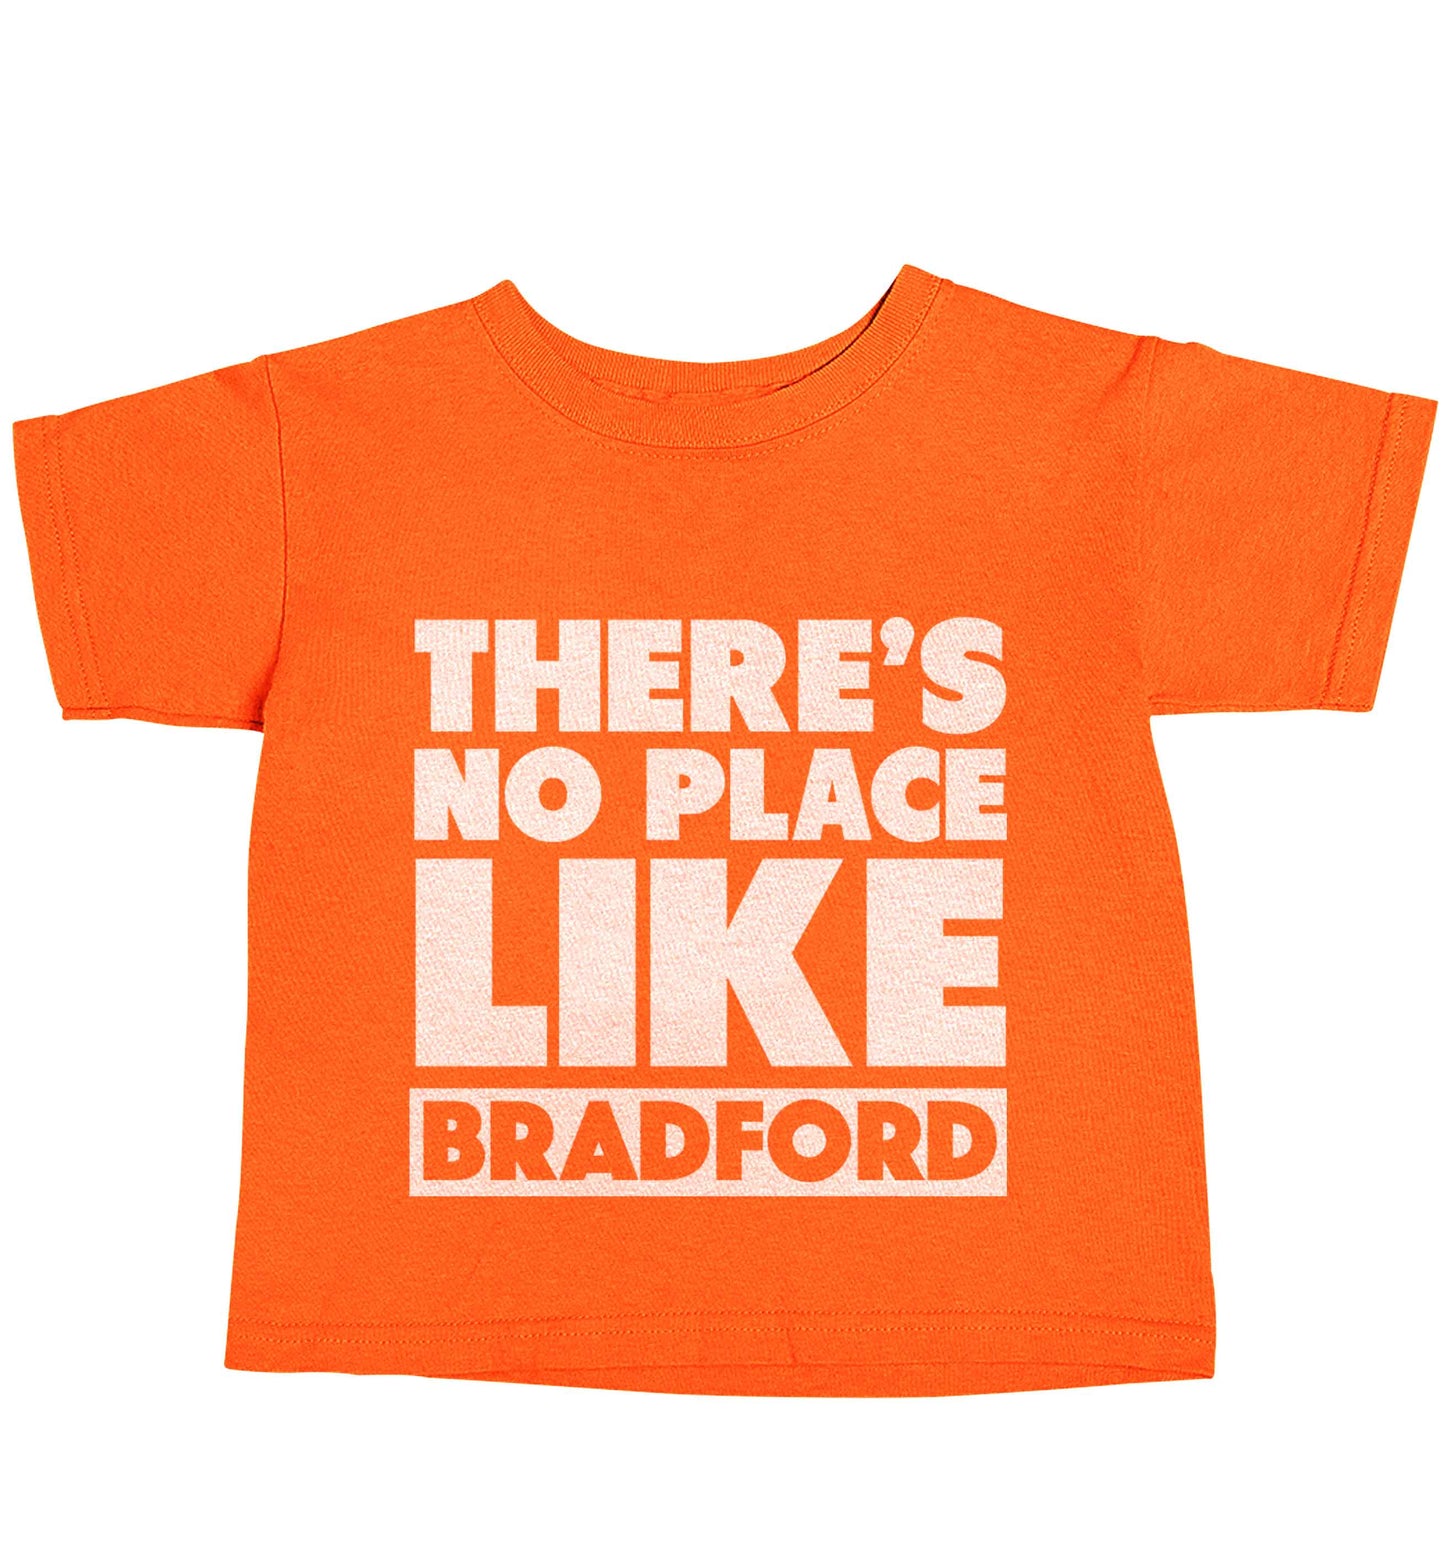 There's no place like Bradford orange baby toddler Tshirt 2 Years